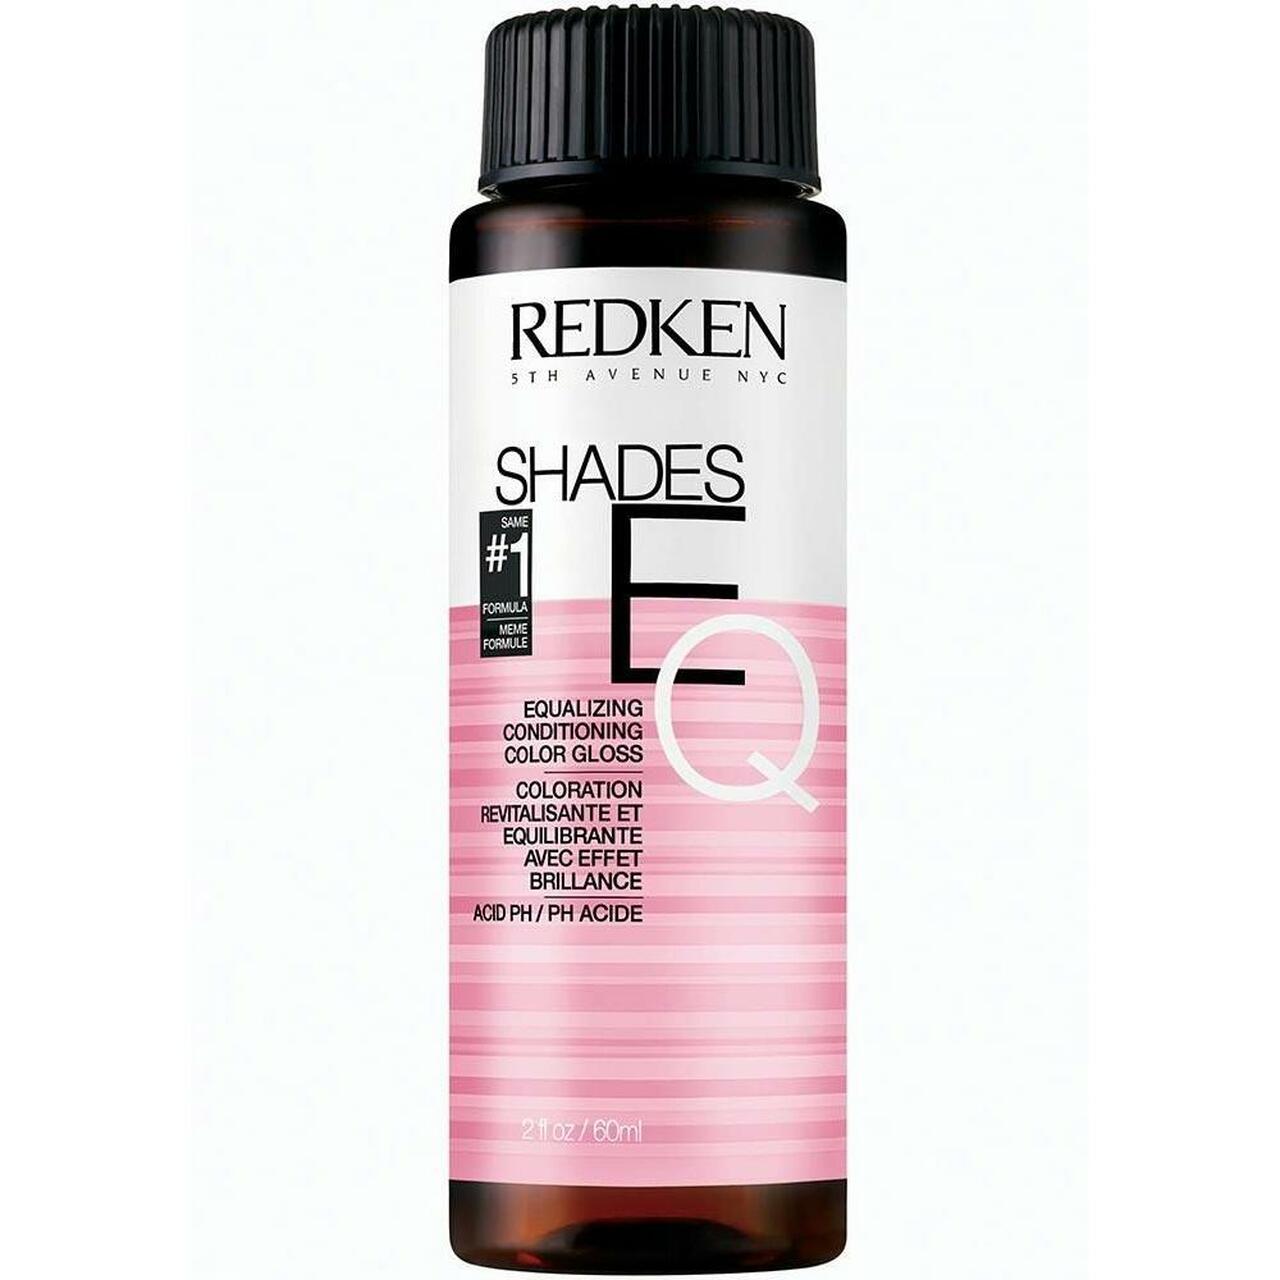 Redken Shades Eq Hair Color Gloss 06Rb, Cherry Cola, 2 Oz - image 1 of 2